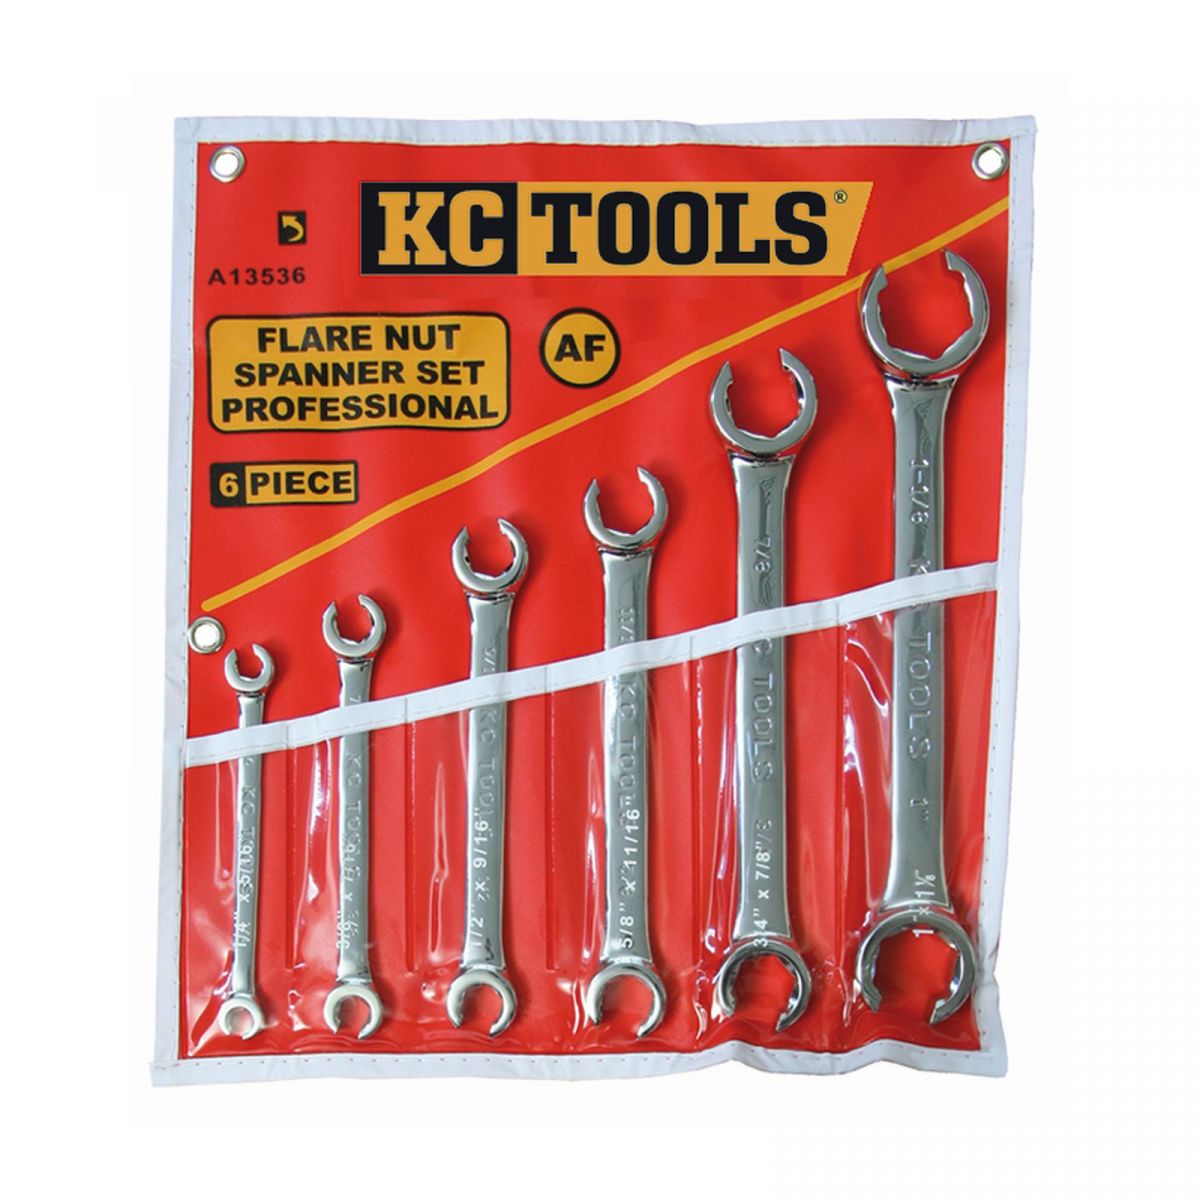 KC Tools 6pc 1/4 Inch - 1 Inch 6-Point Flare Nut Spanner Set